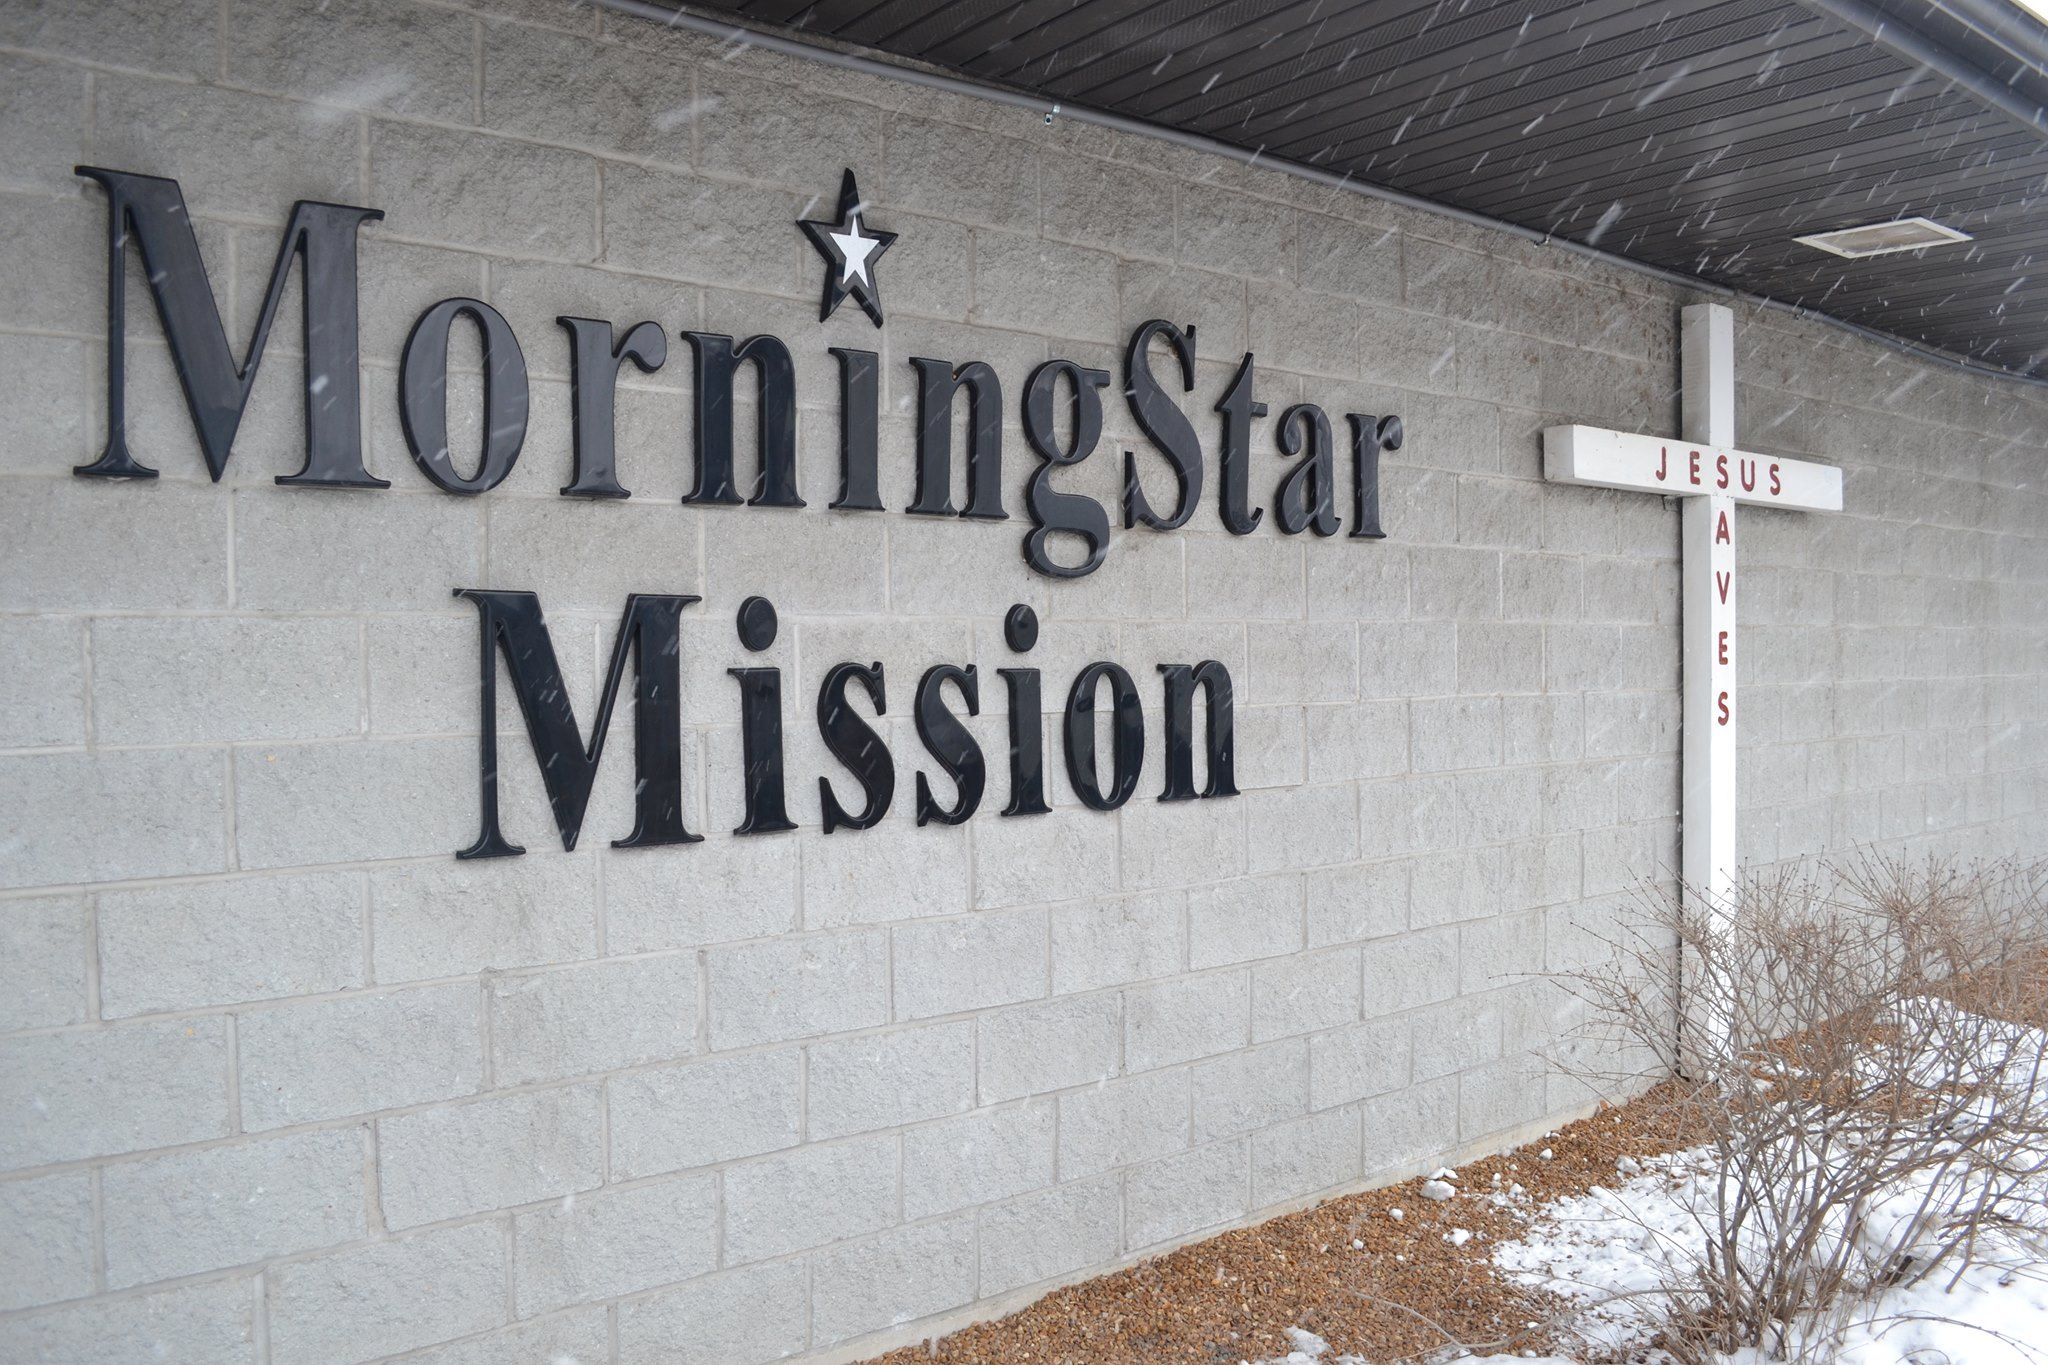 Homeless Shelter and Assistance For Men, Women, Families MorningStar Mission